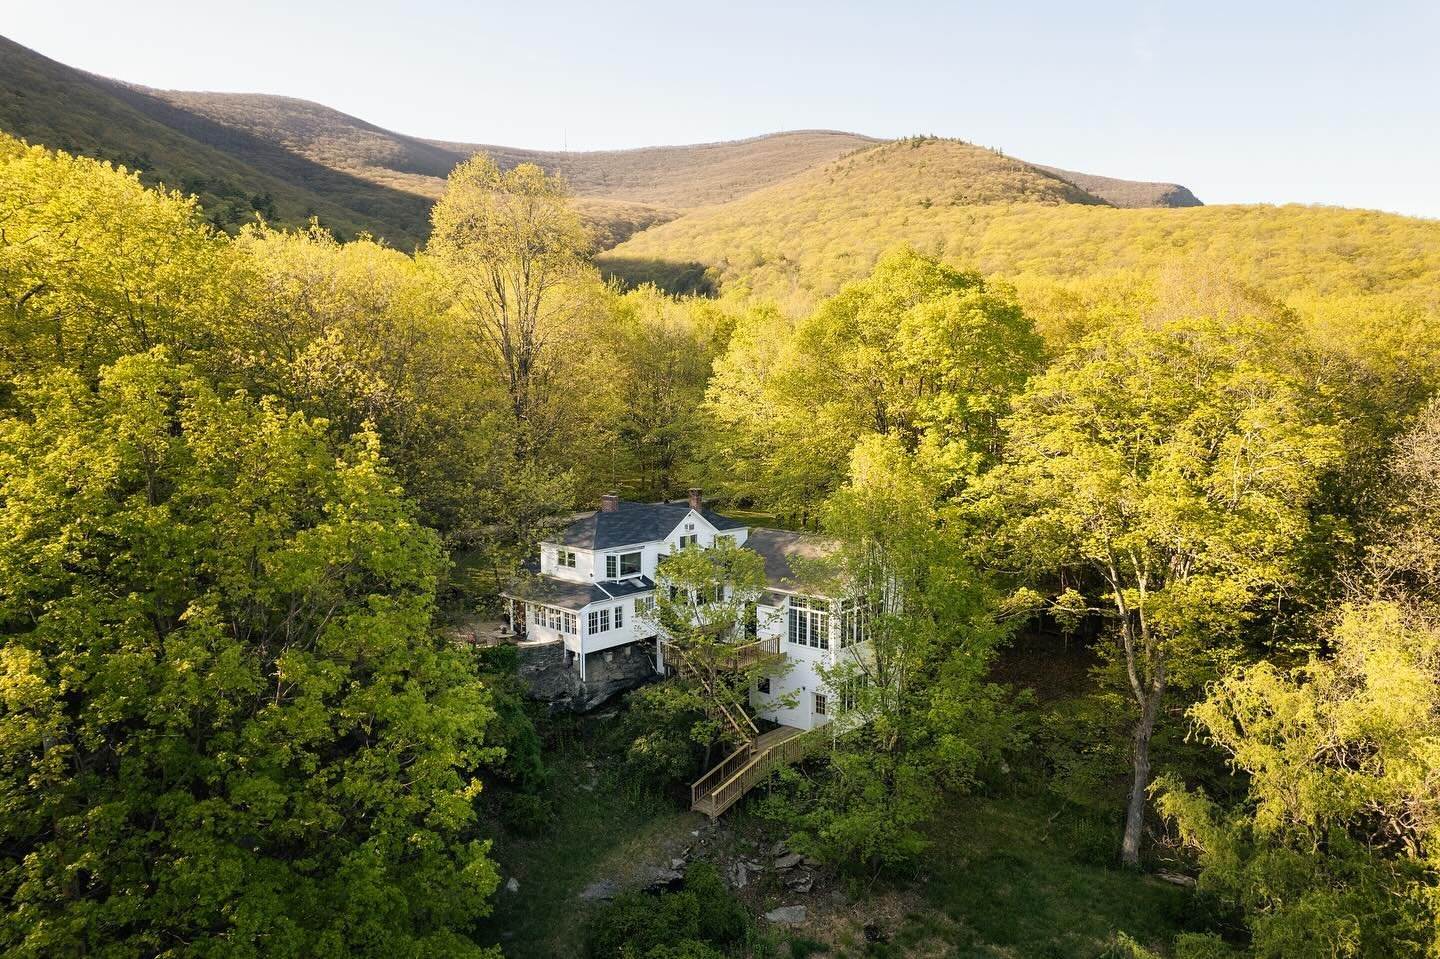 Meet the incredible Silver Wings Compound in Woodstock. This extremely special property is located on a private road with hiking trail, pond and pool, along with multiple structures including a guest house, artist studio, barn, and pool house. The ho